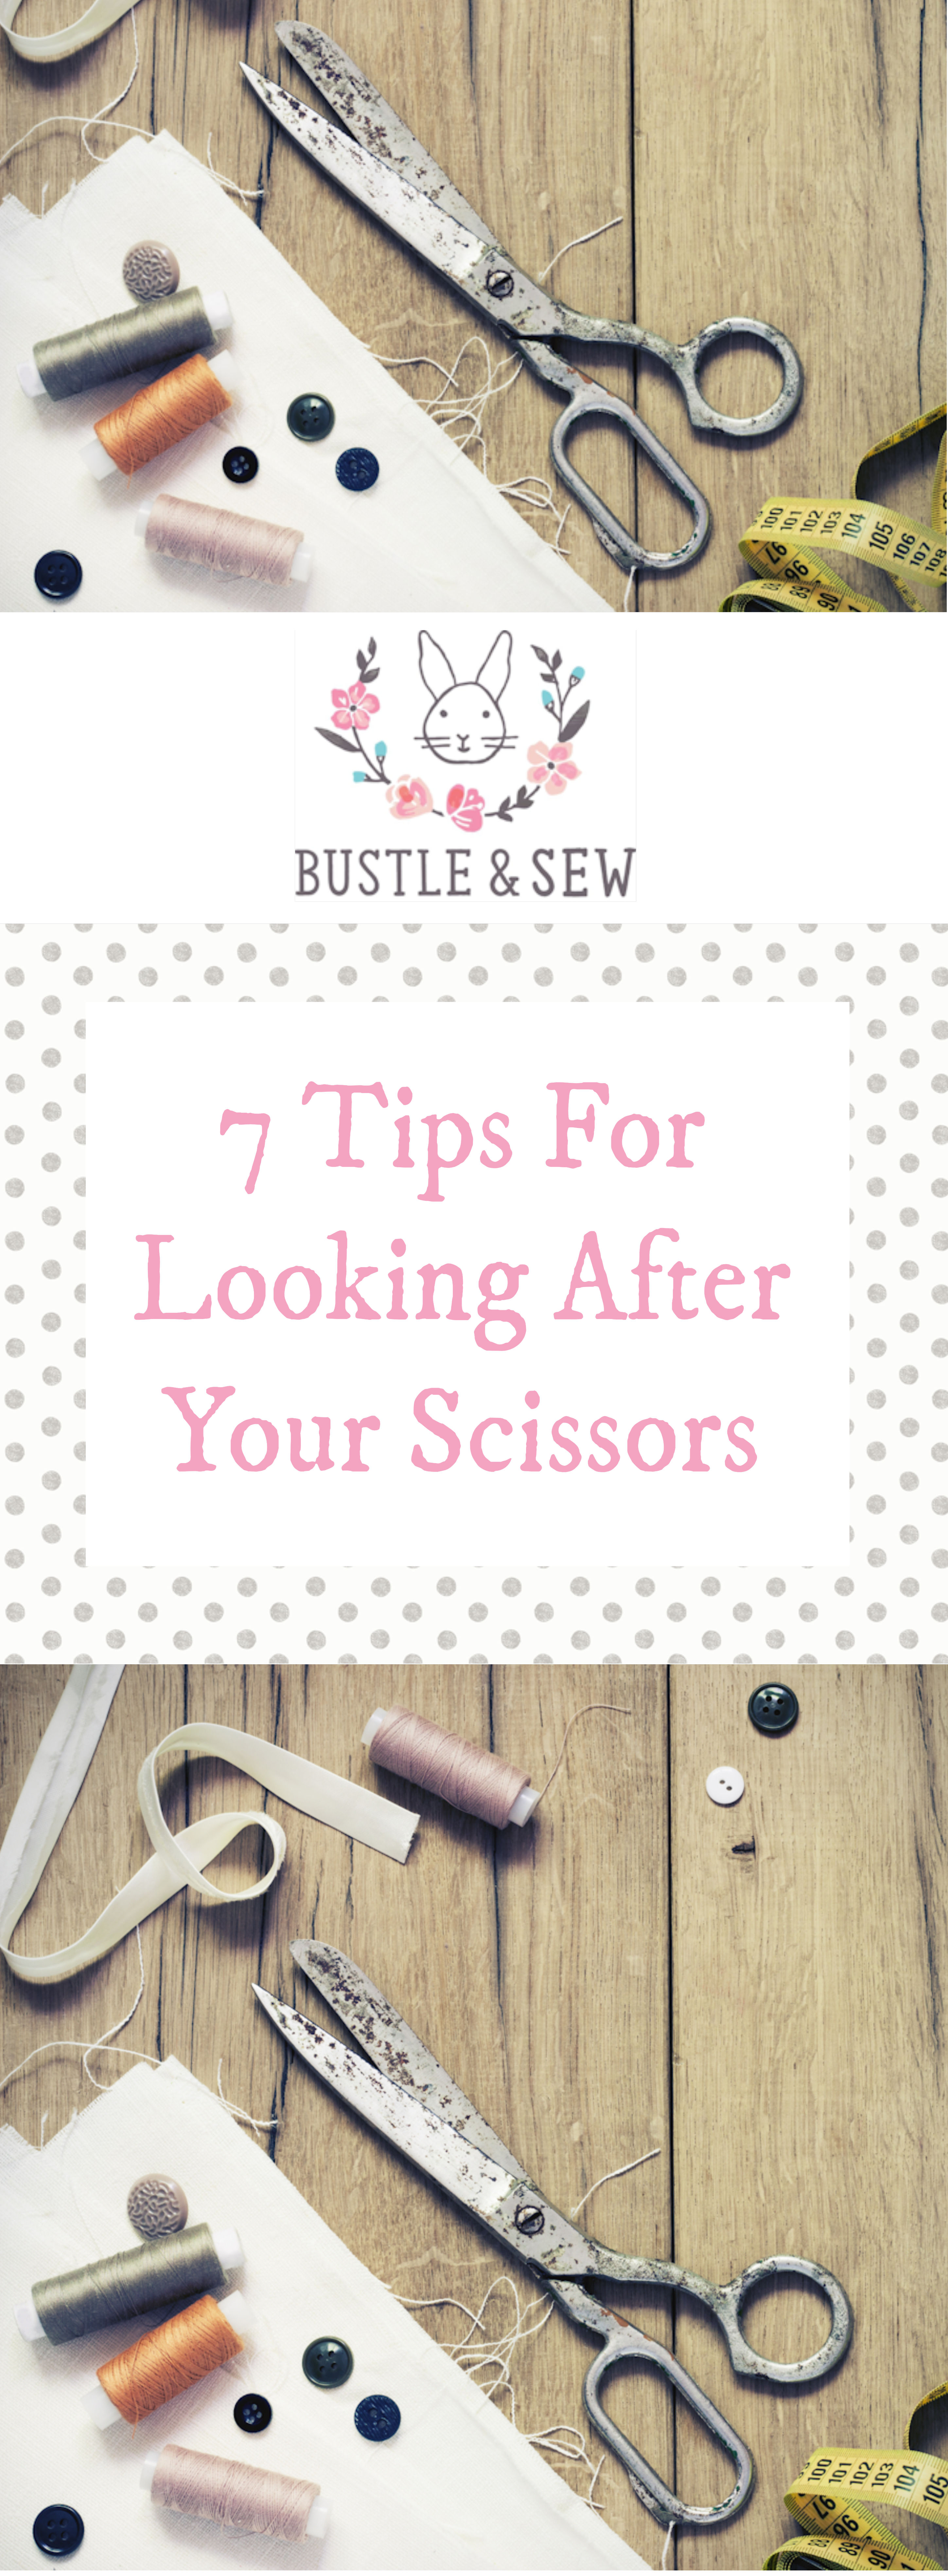 7 Tips for Looking After Your Scissors by Bustle & Sew